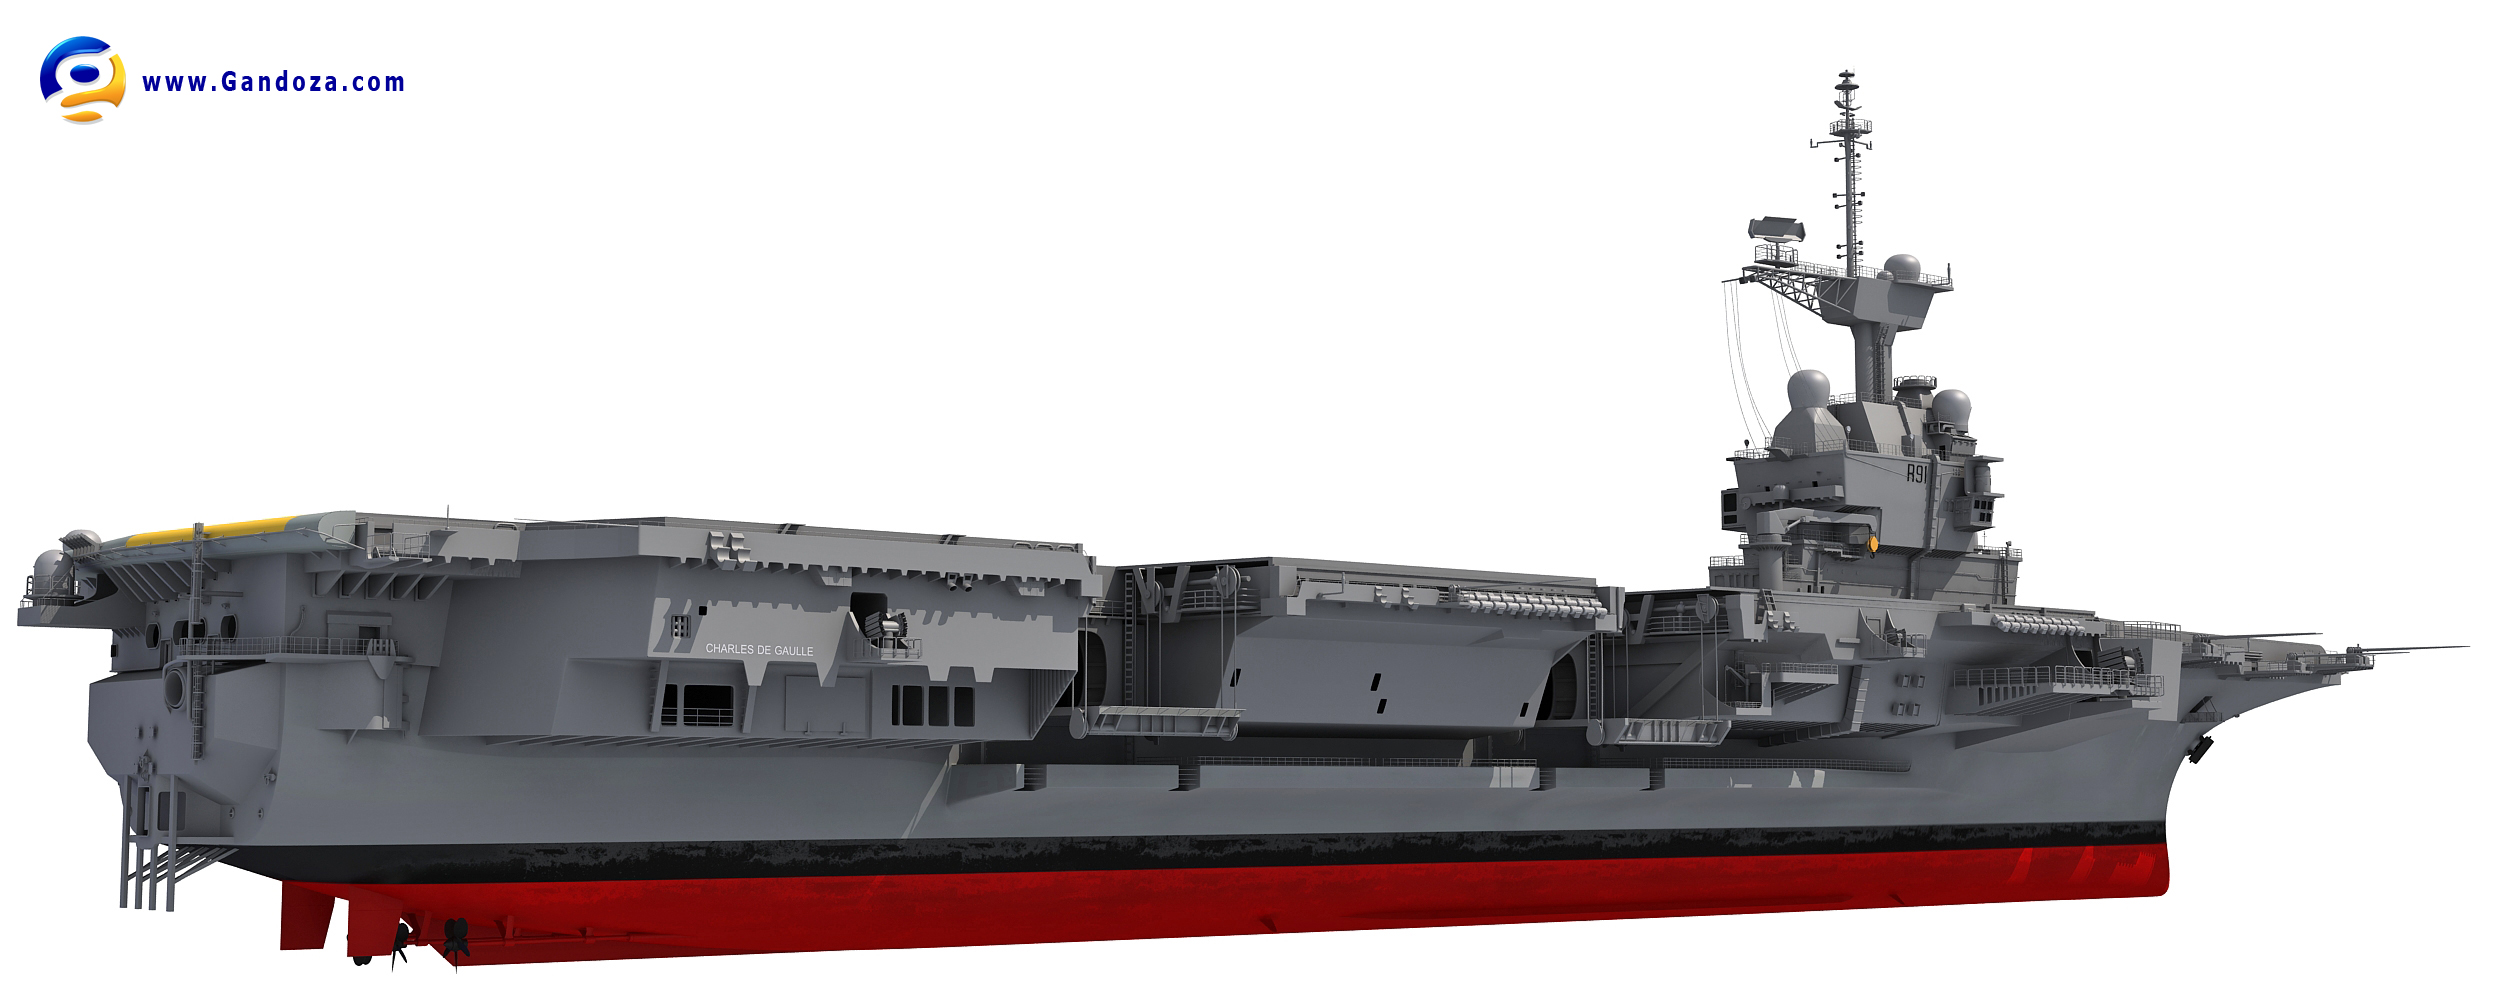 French Aircraft Carrier Charles De Gaulle (R91) #2